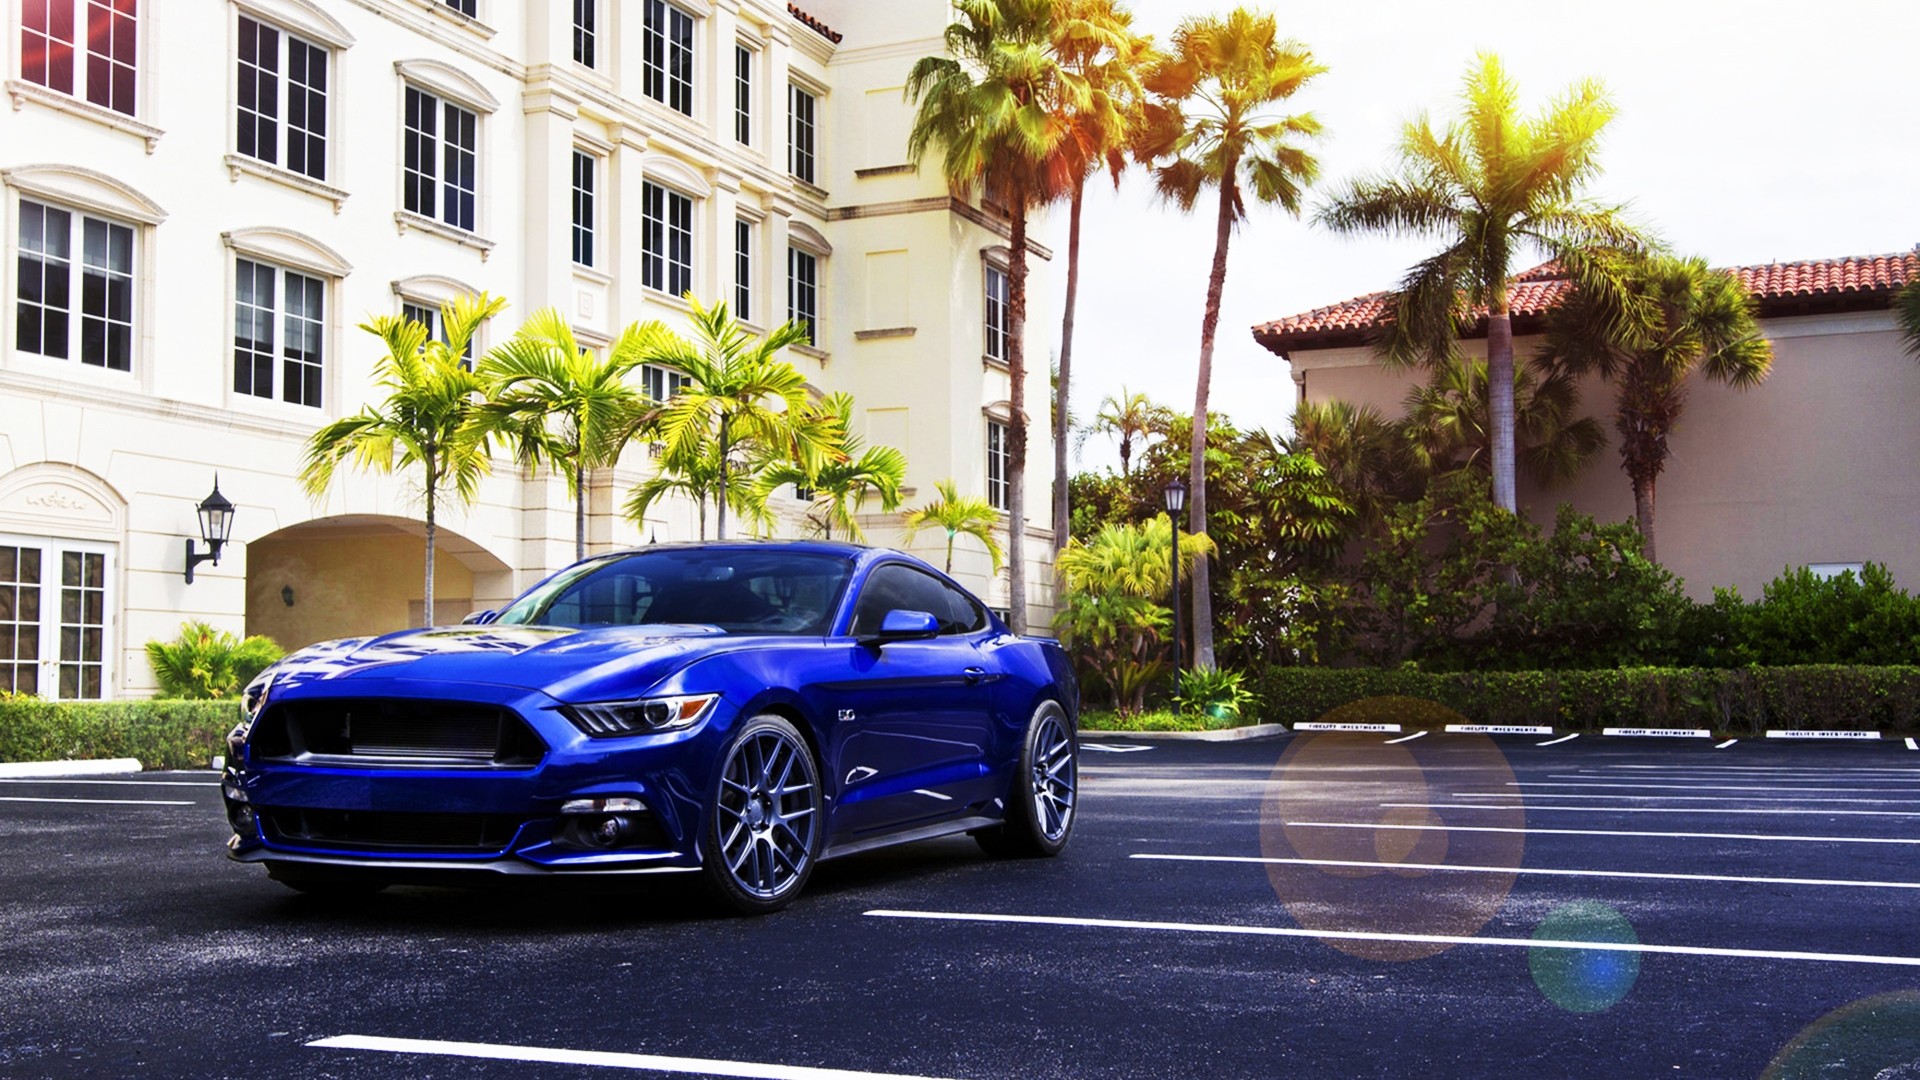 General 1920x1080 car Ford Mustang blue cars palm trees Ford vehicle Ford Mustang S550 American cars